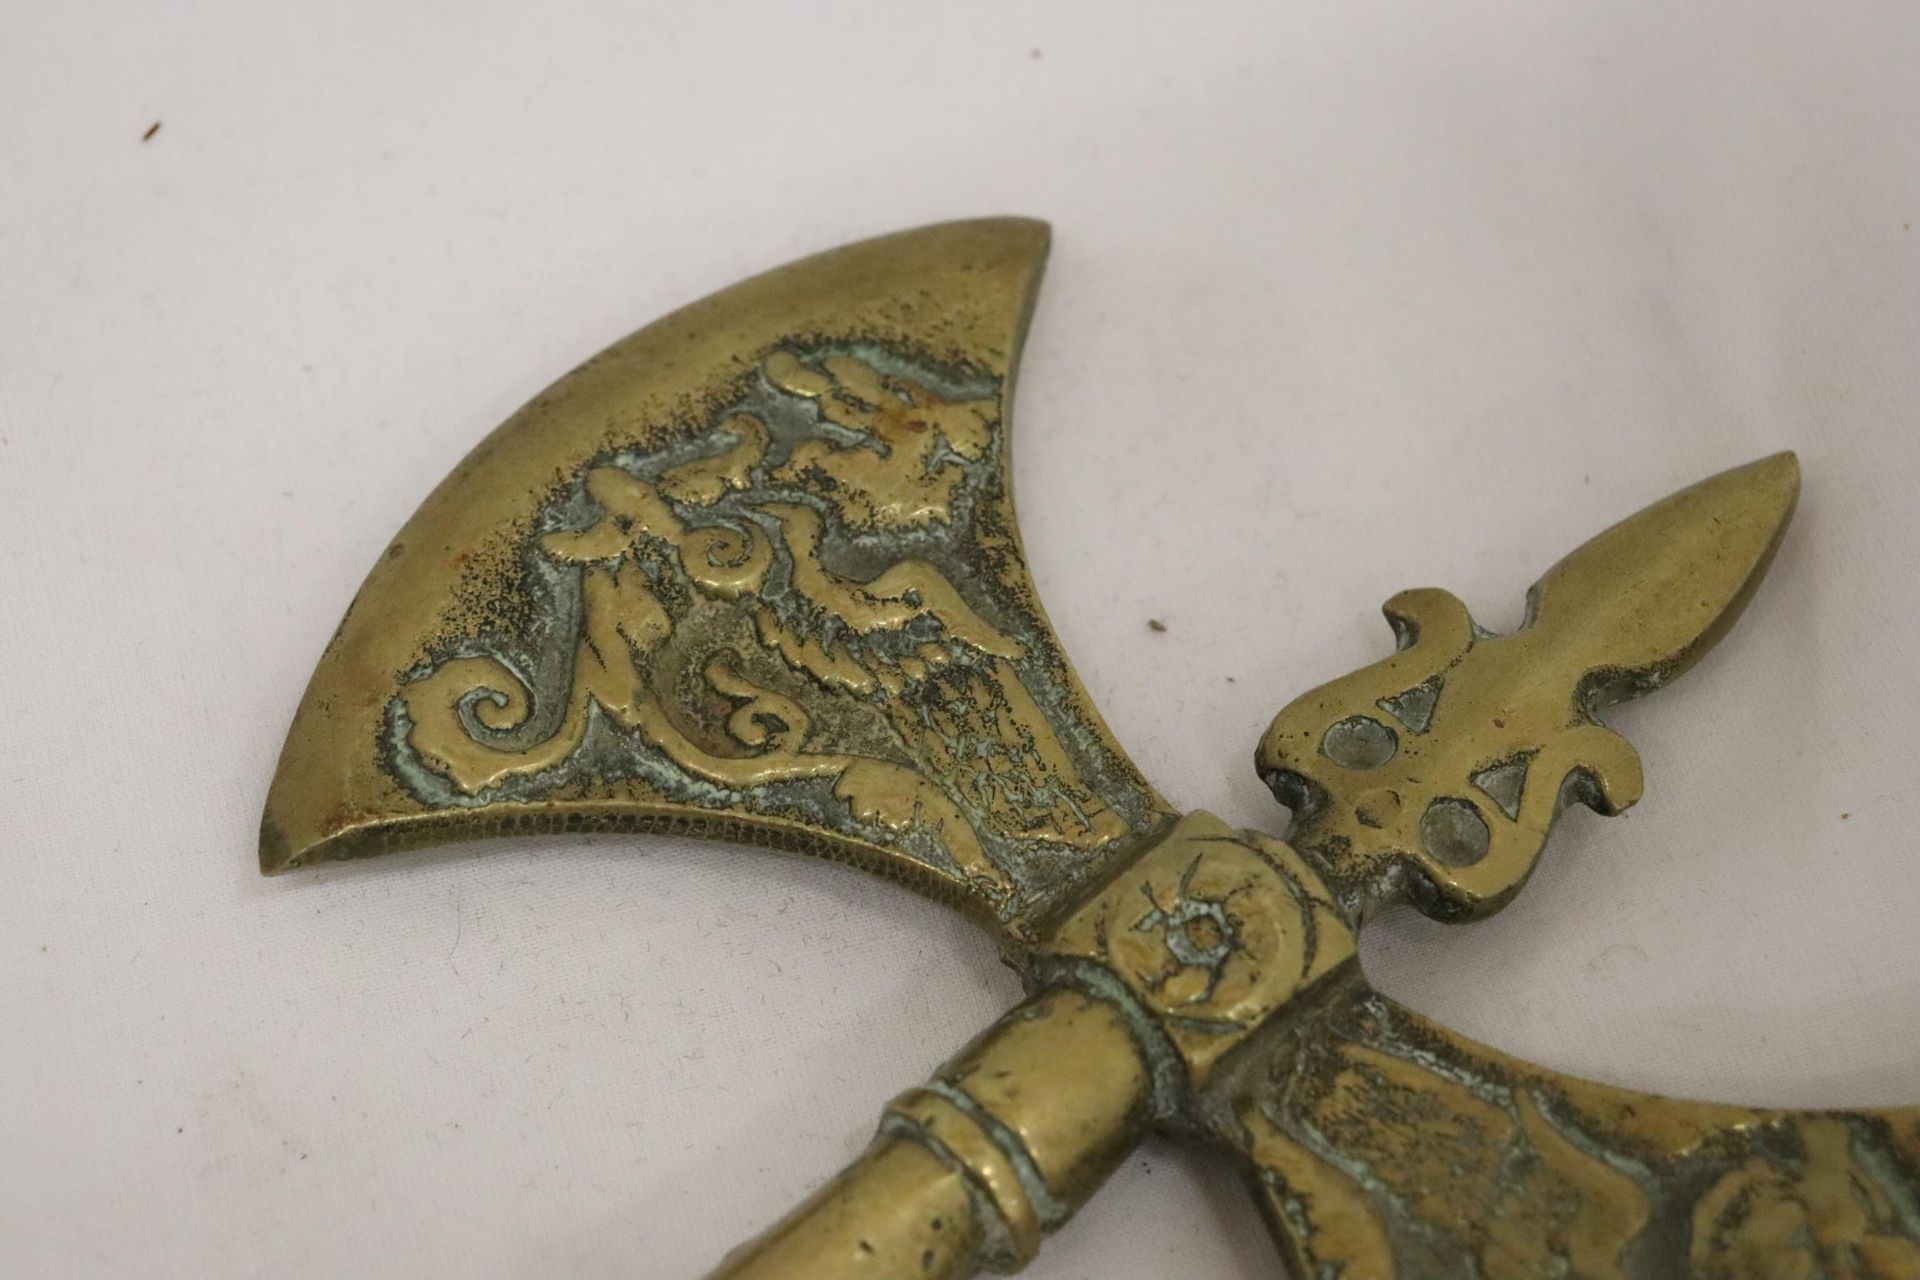 A SOLID BRASS DOUBLE SIDED BATTLE AXE - Image 3 of 5